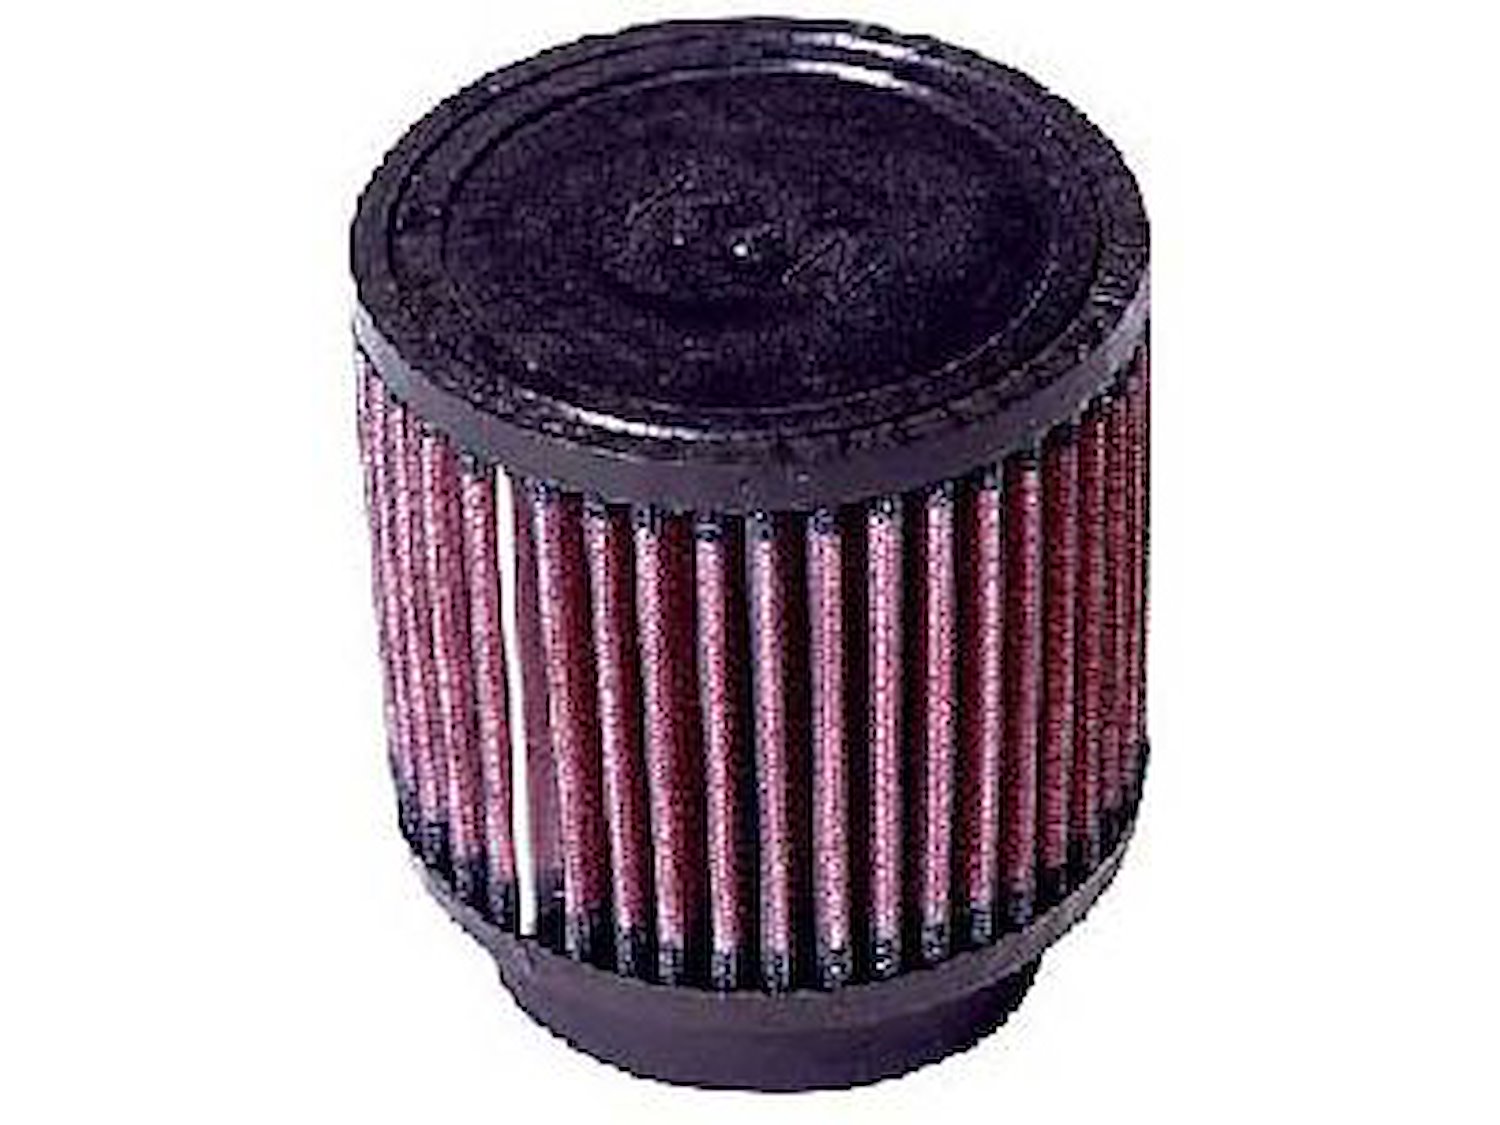 Round Straight Air Filter Flange Dia. (F): 3" (76 mm)